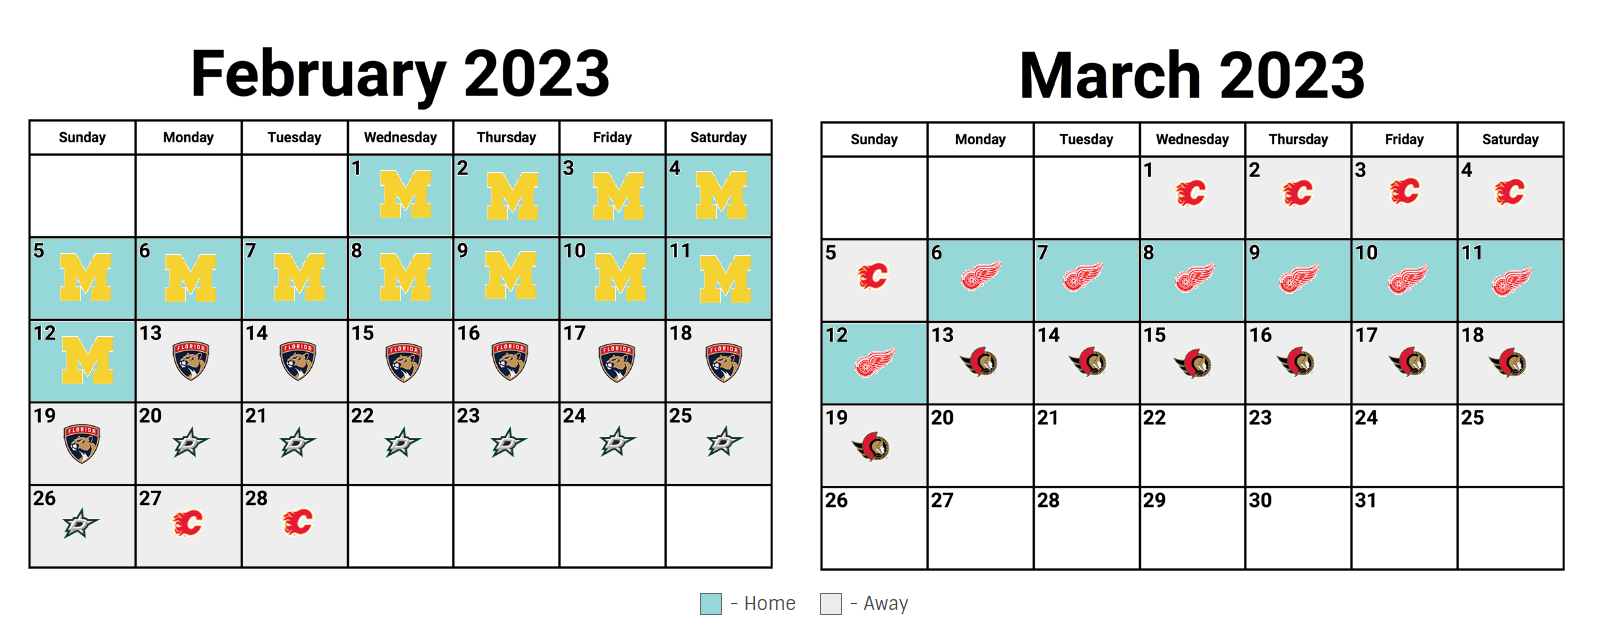 Feb-March Sched 2022.png